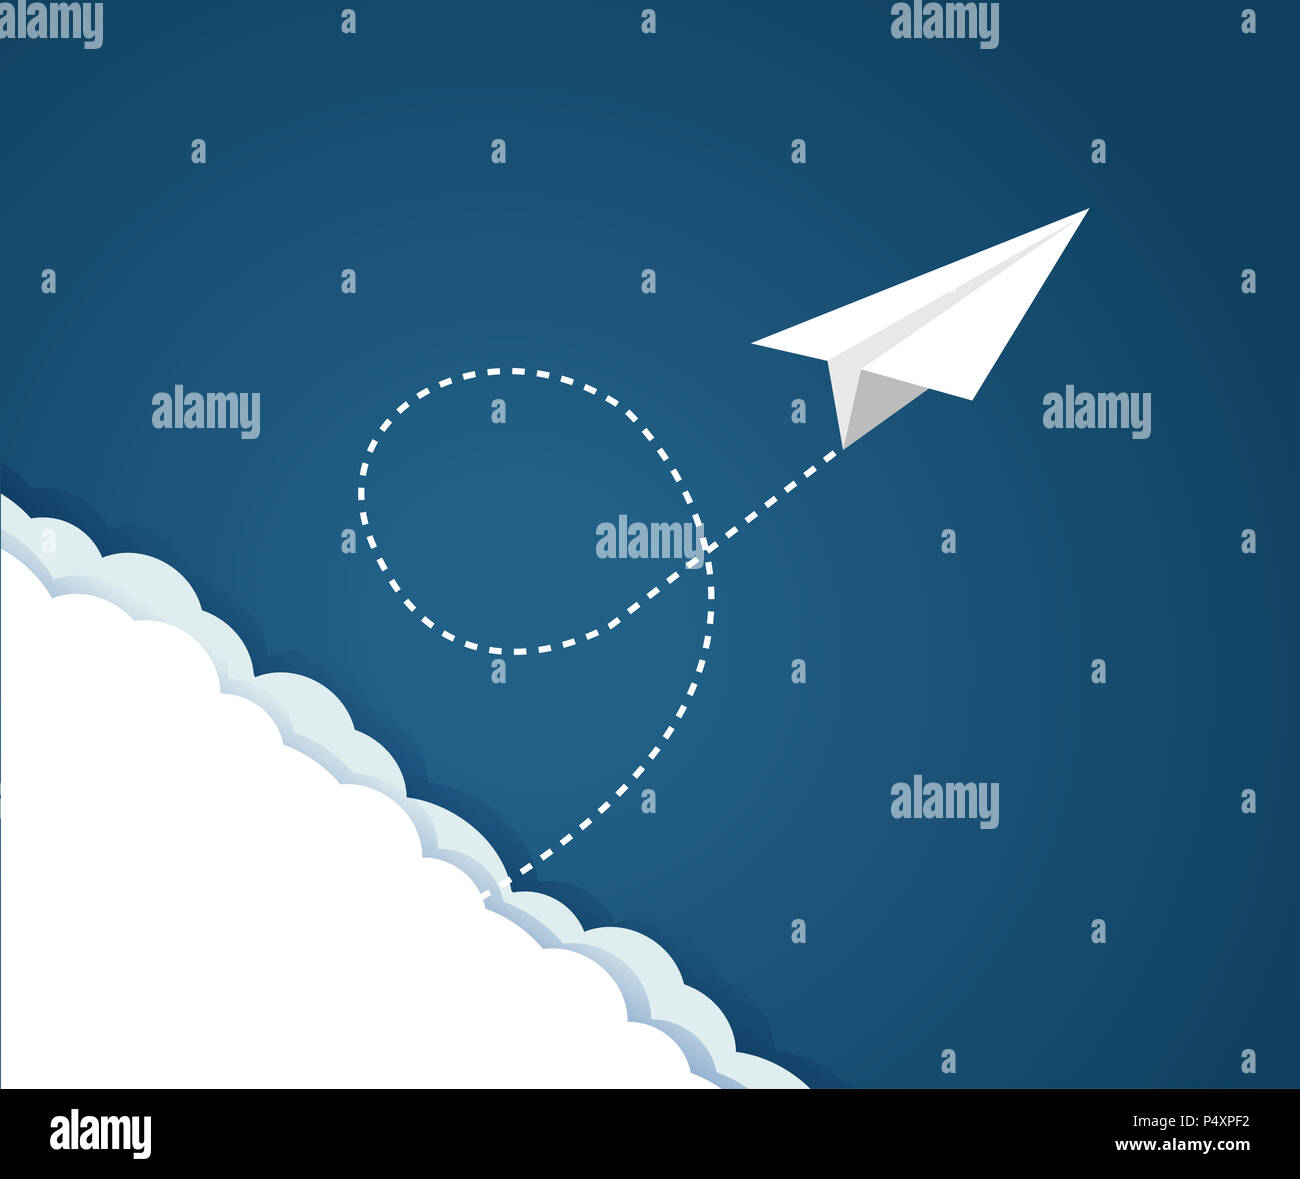 Paper plane flying pattern over  a blue sky and clouds. illustration design graphic Stock Photo